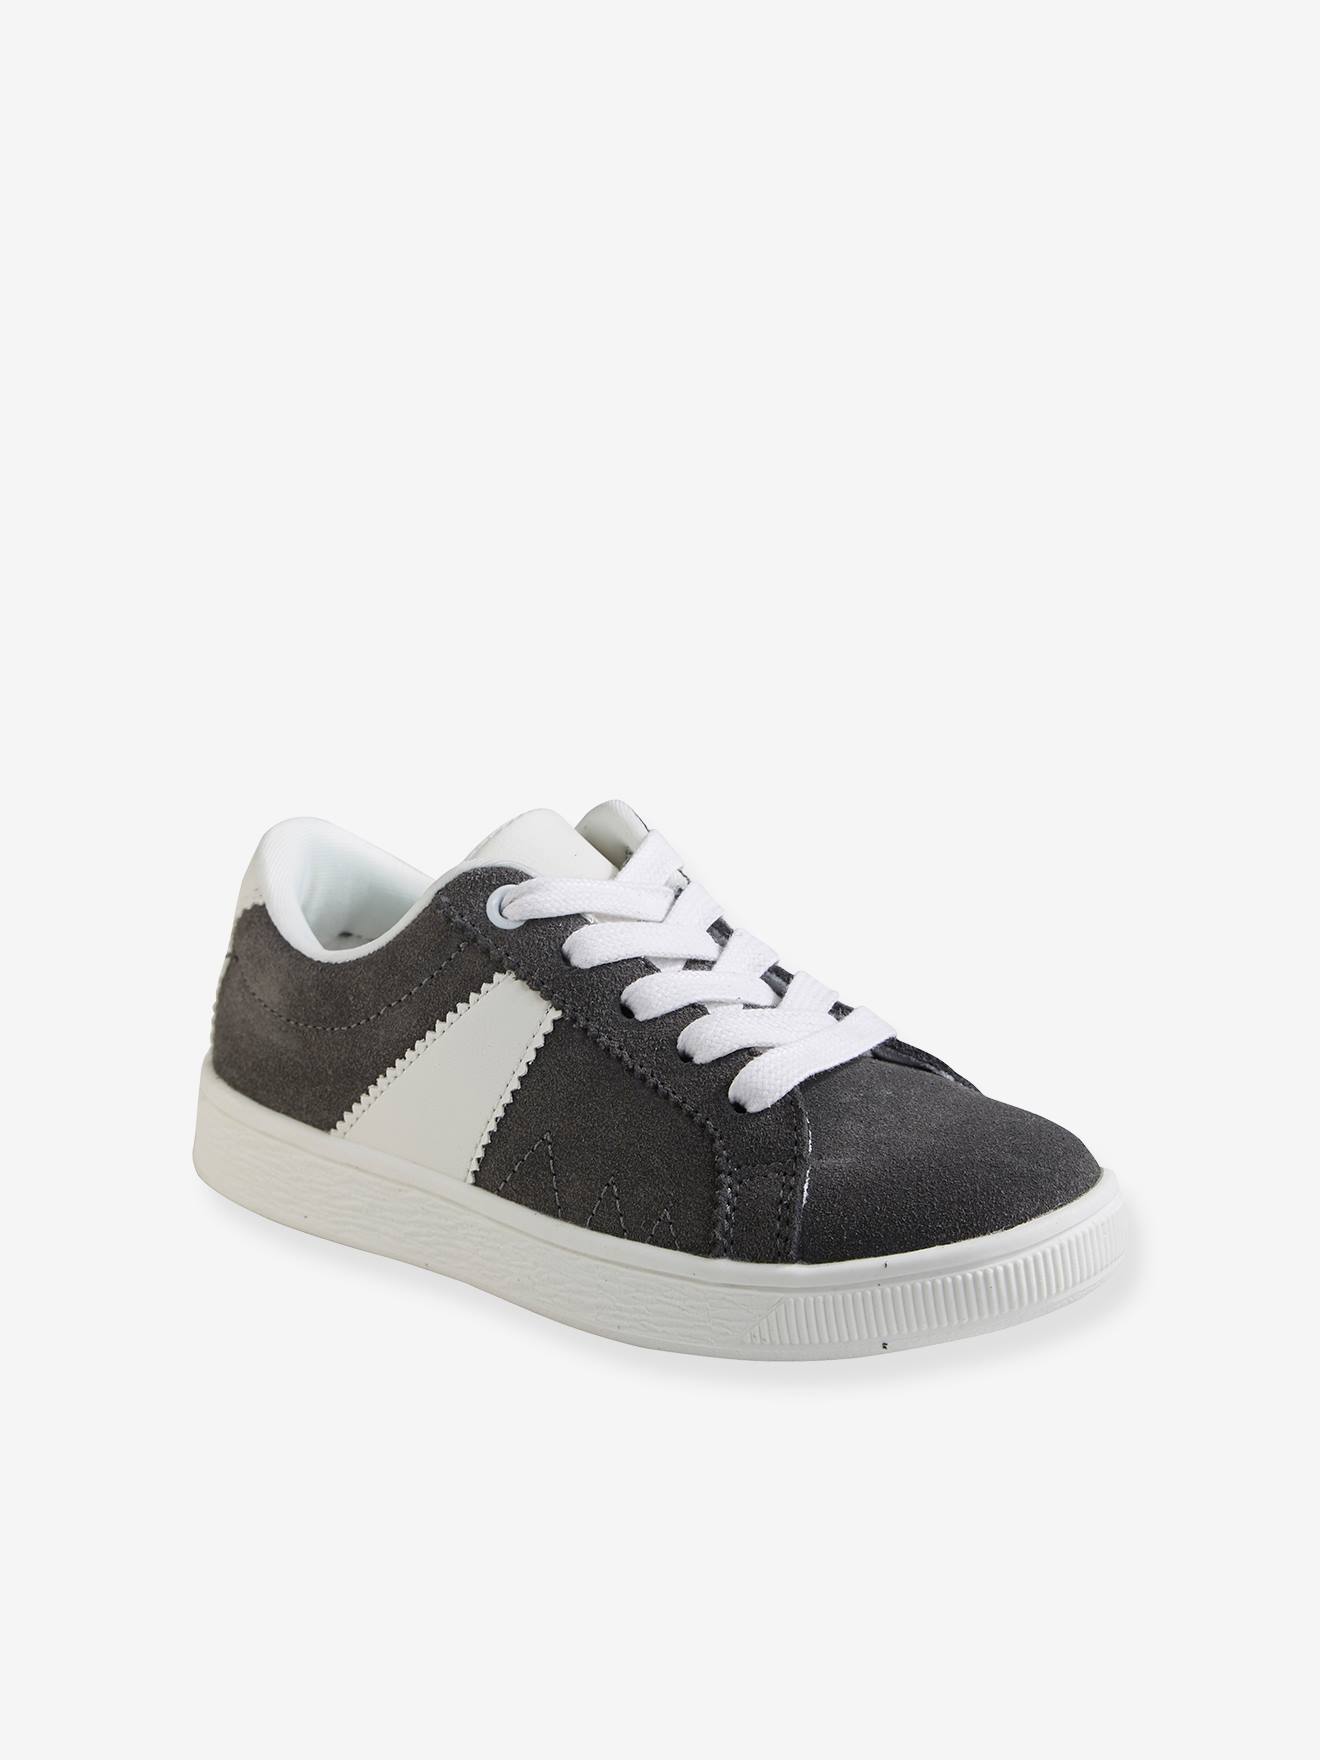 black leather boys trainers